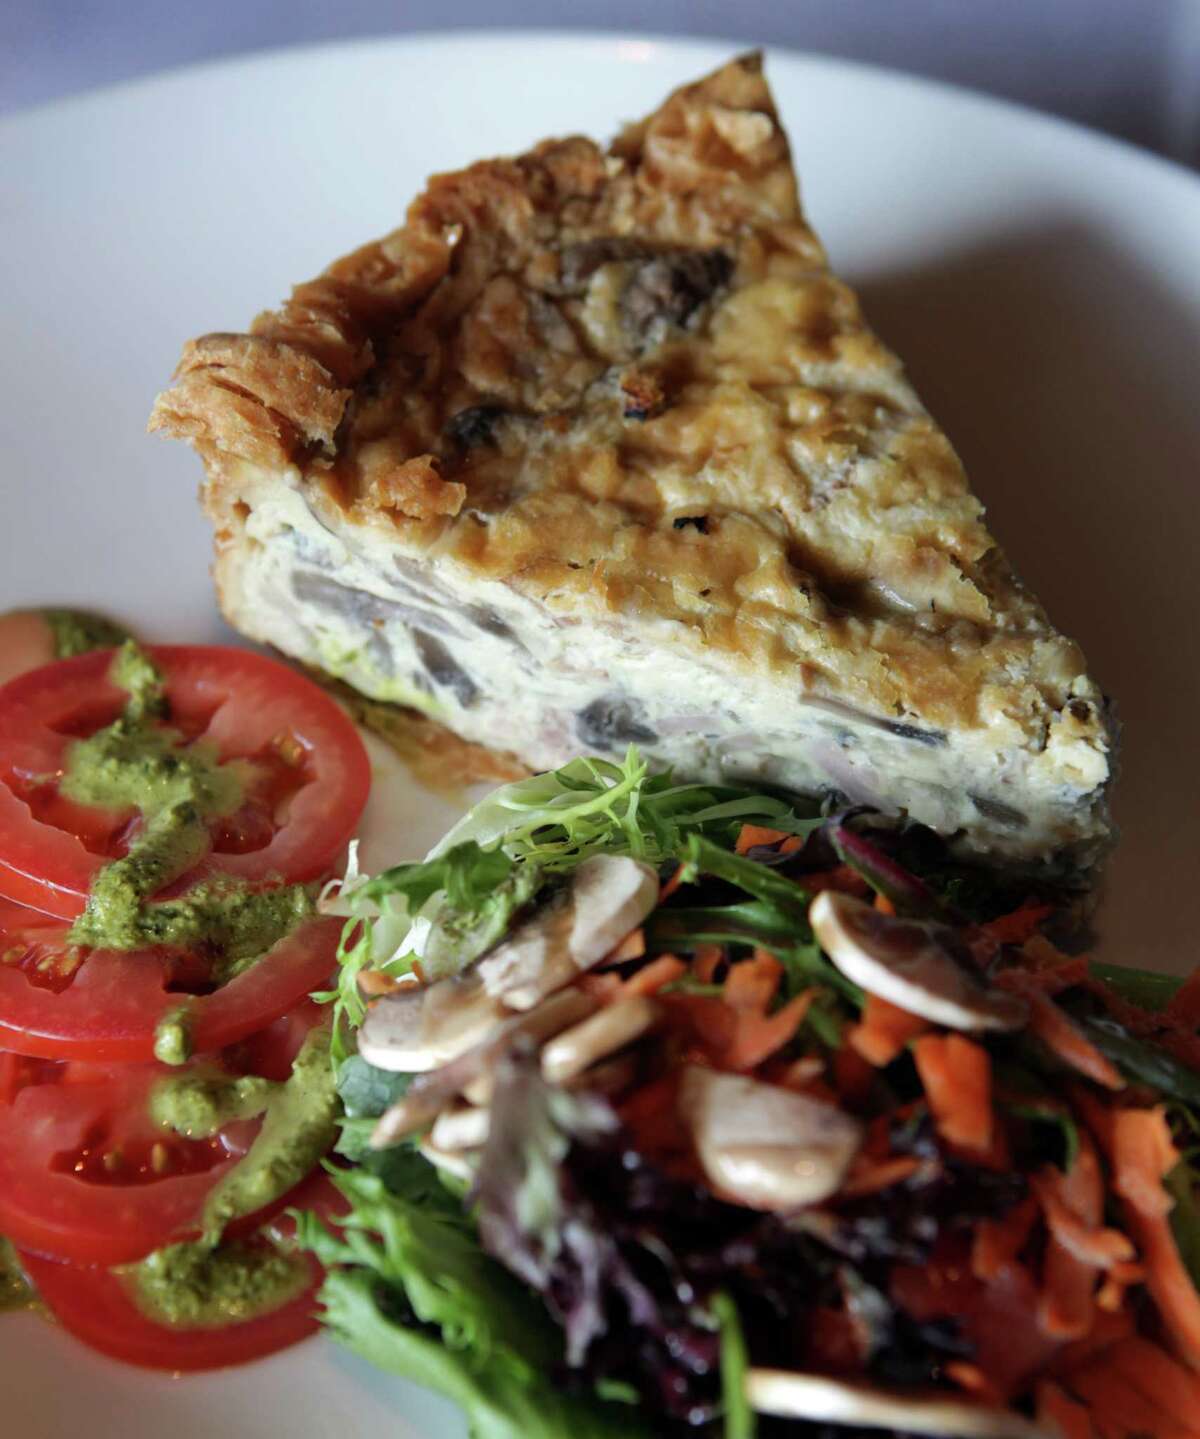 The Quiche Lorraine at Frederick's Bistro is called exceptional.